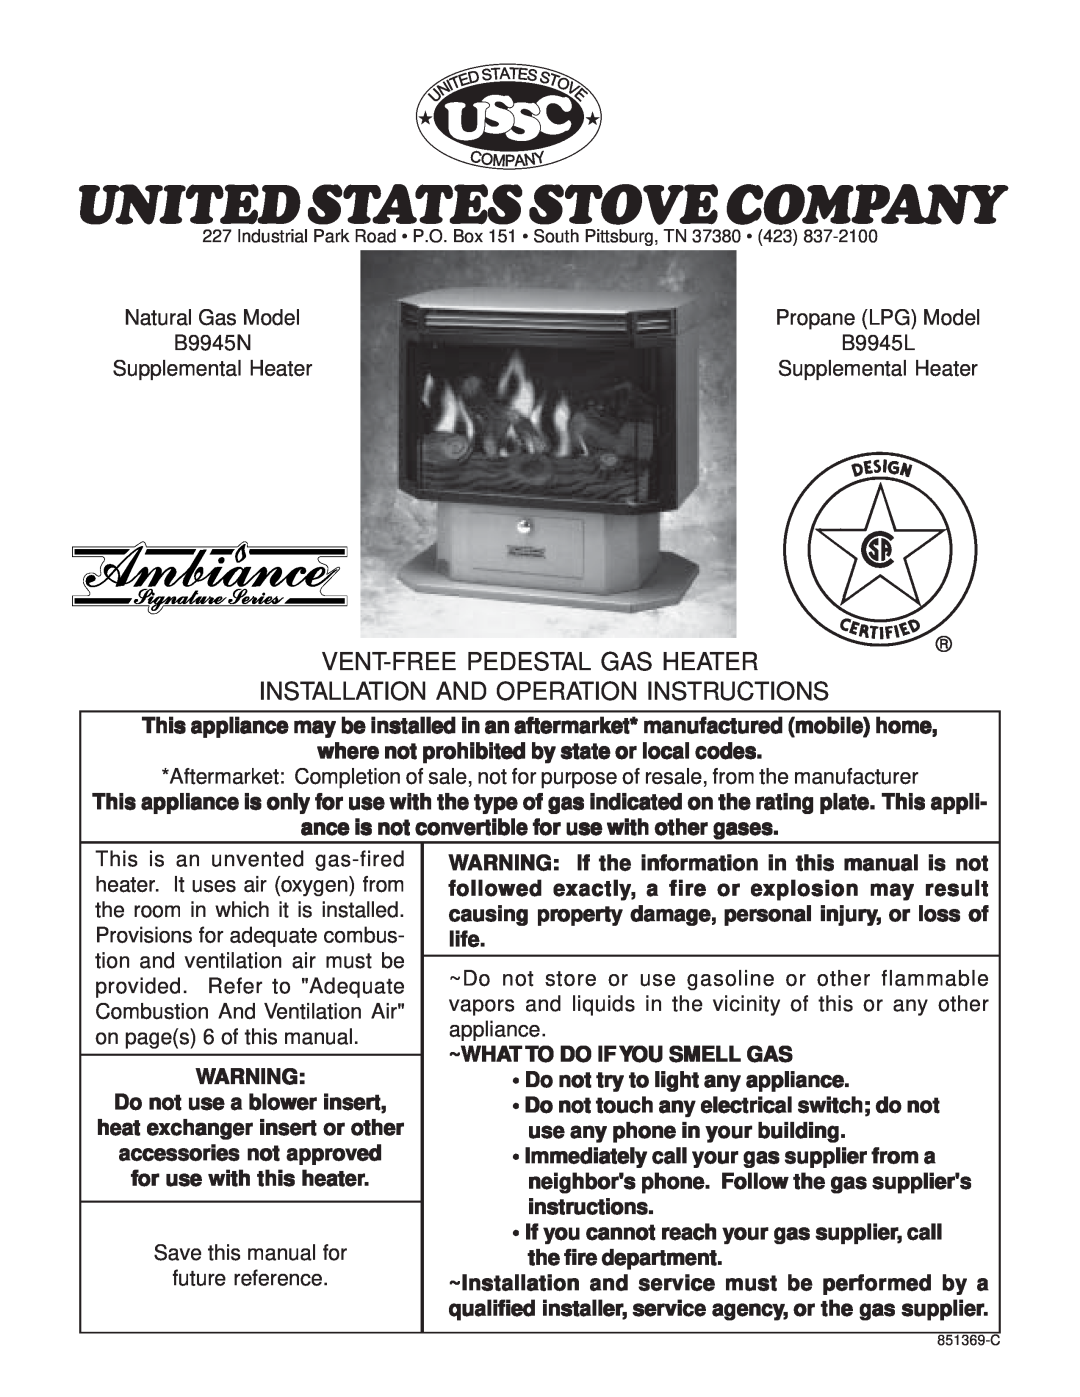 United States Stove B9945N manual Unitedstatesstovecompany, Vent-Freepedestal Gas Heater, Do not use a blower insert 